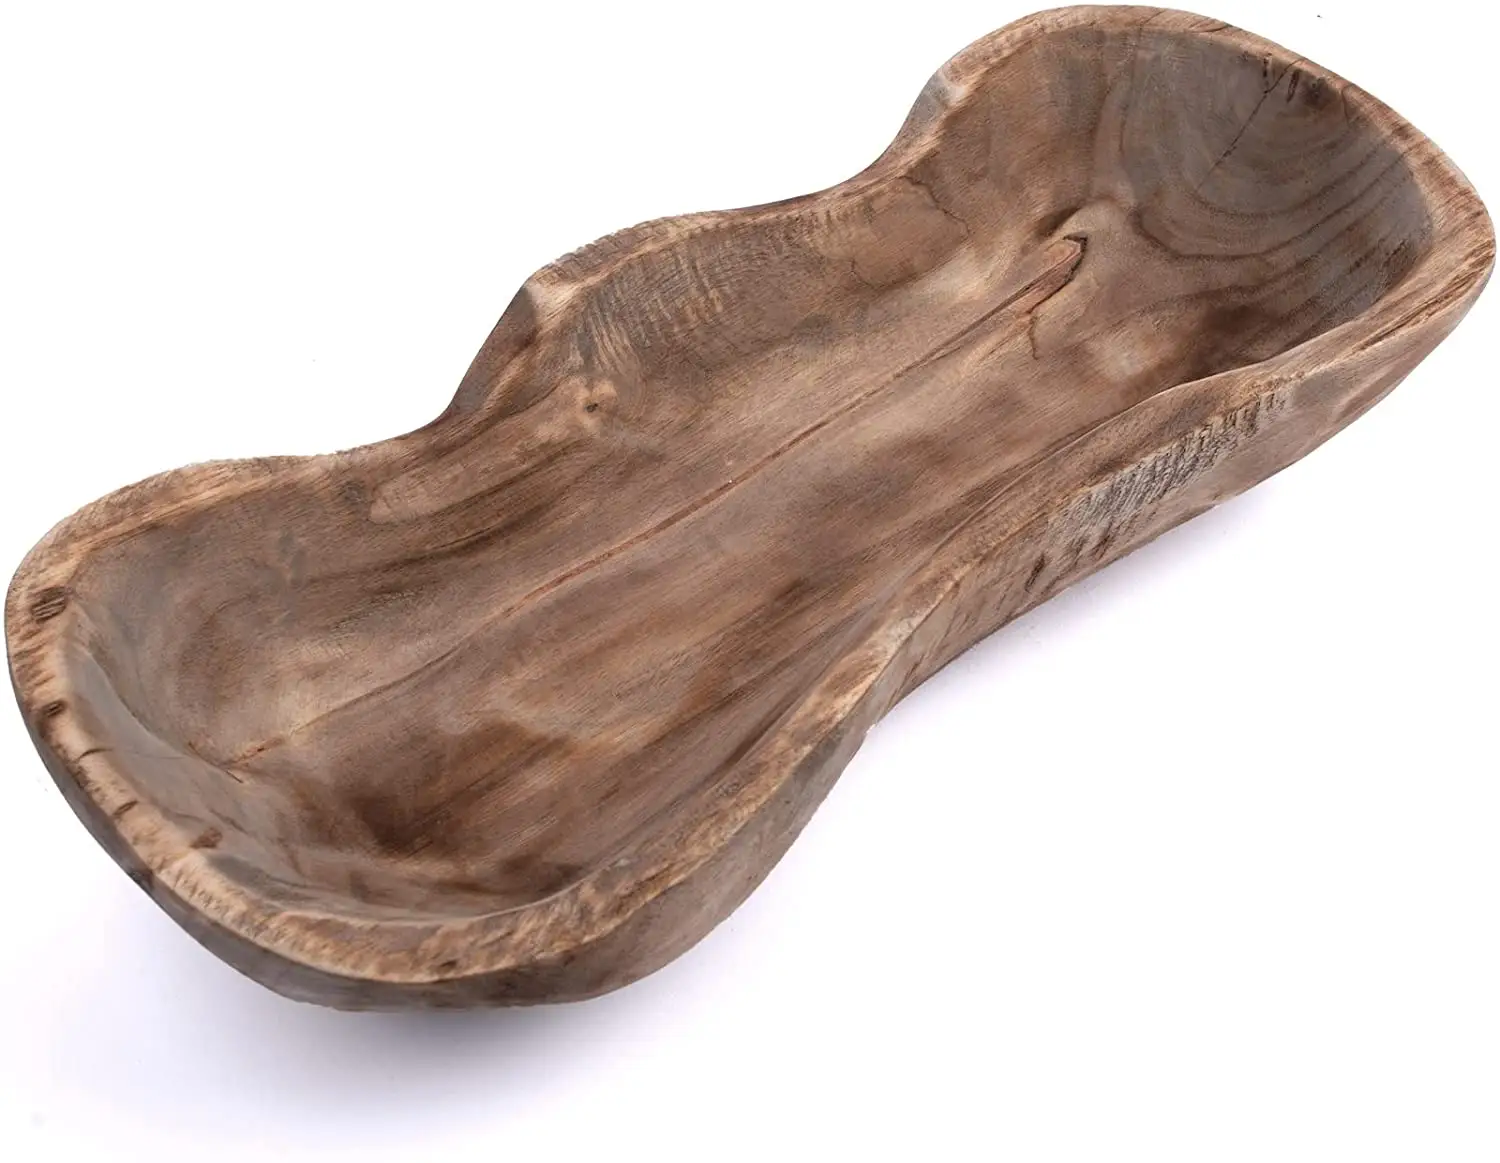 Decorative Dough Bowl -Hand Carved 13 inches long Wooden Bowl great as Centerpiece Fruit Bowl or Farmhouse Decor